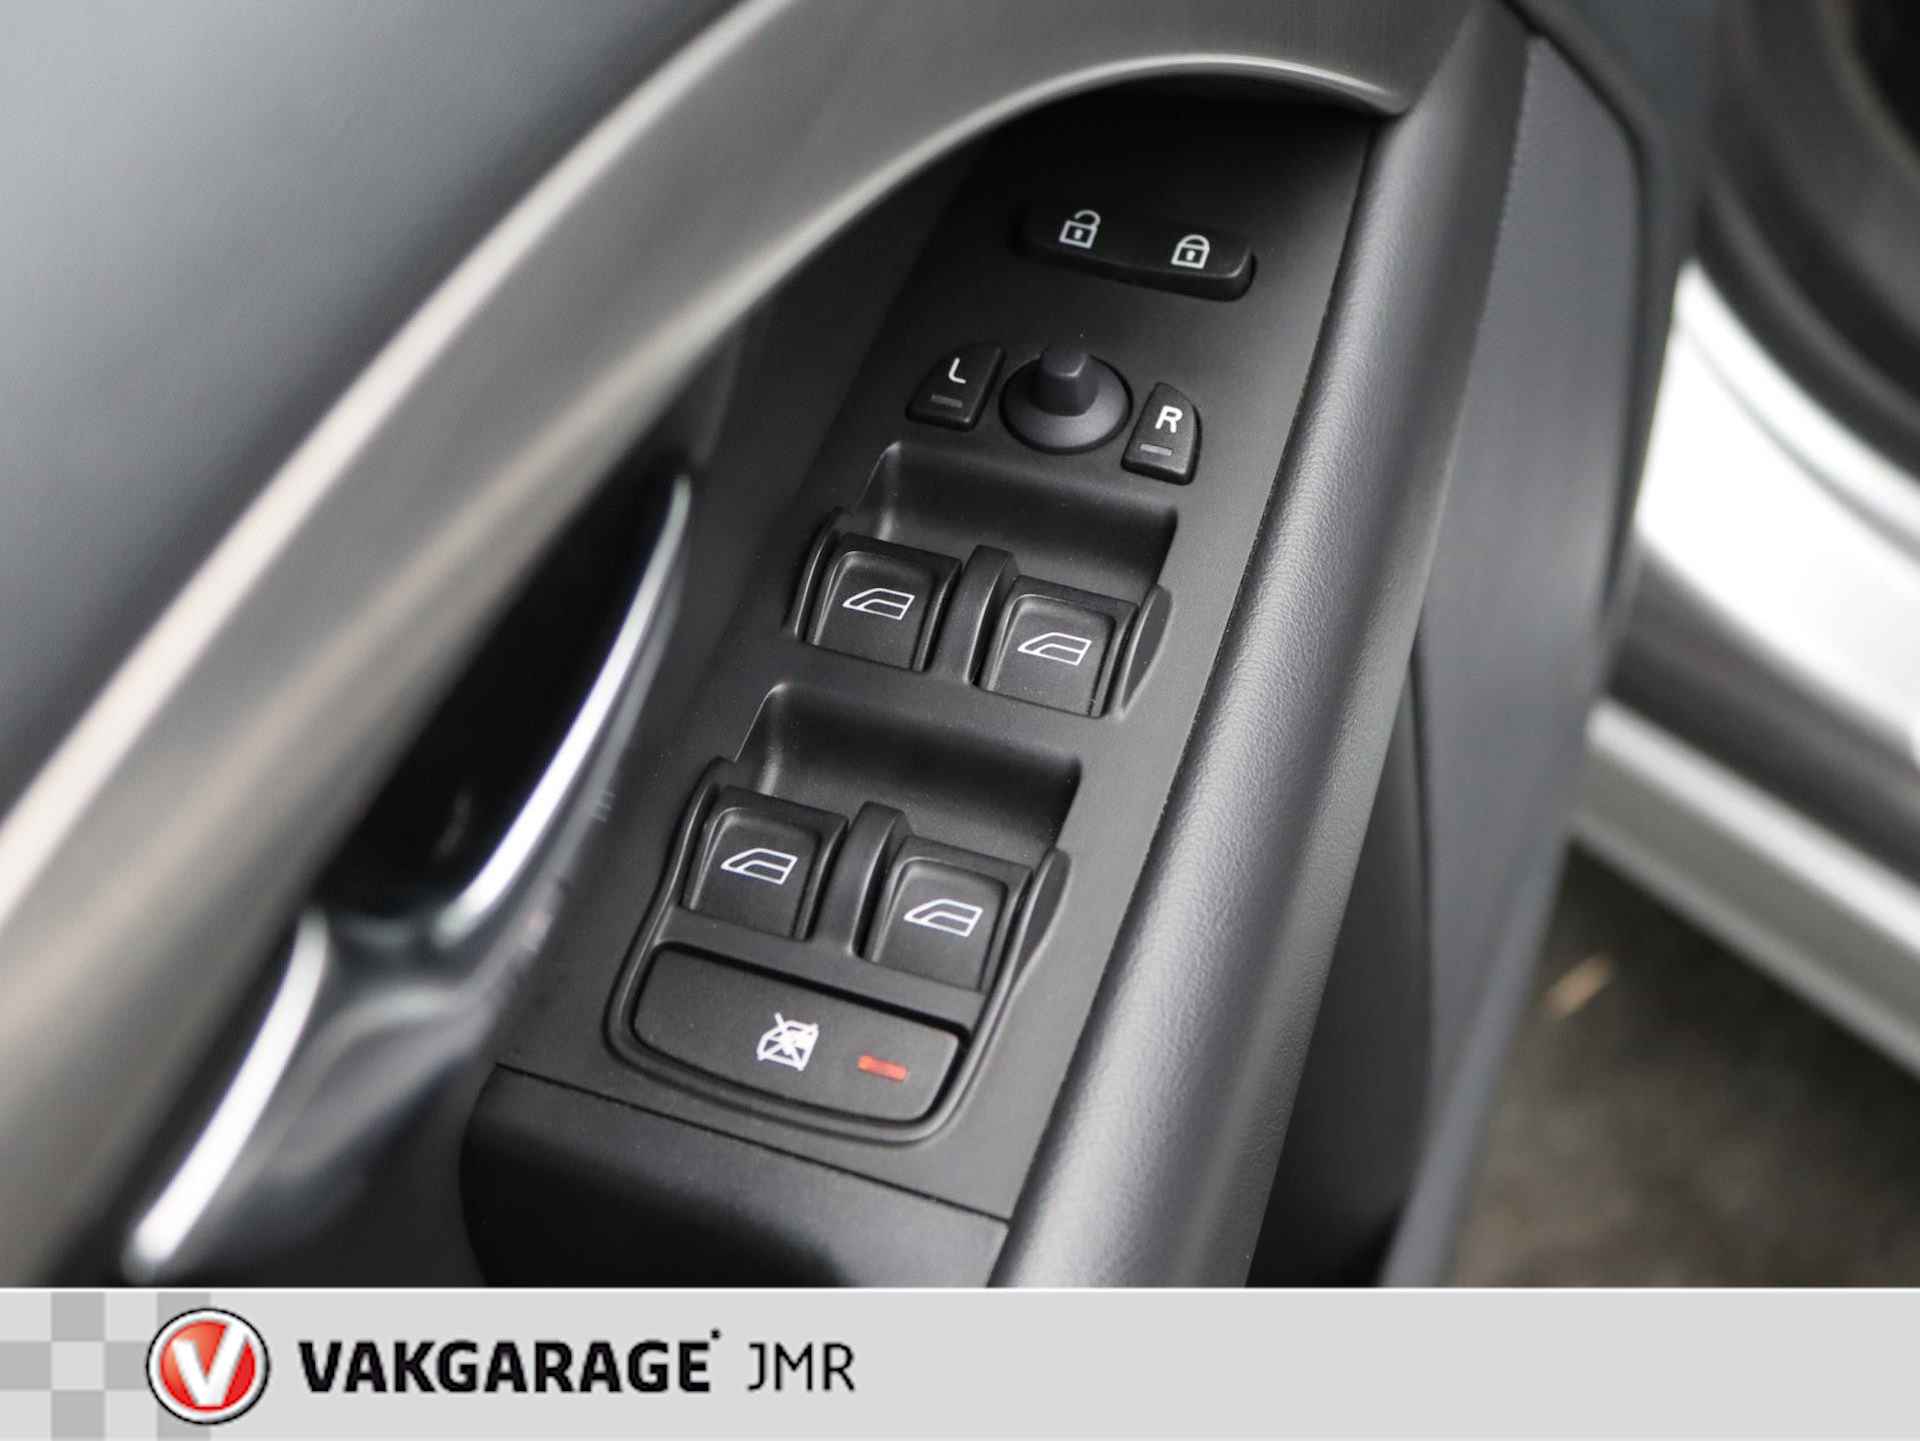 Volvo V70 2.5FT Momentum Youngtimer Trekhaak - PDC Achter - Stoel + Achterbank verwarming - Bluetooth - Climate en Cruise Control - 28/39